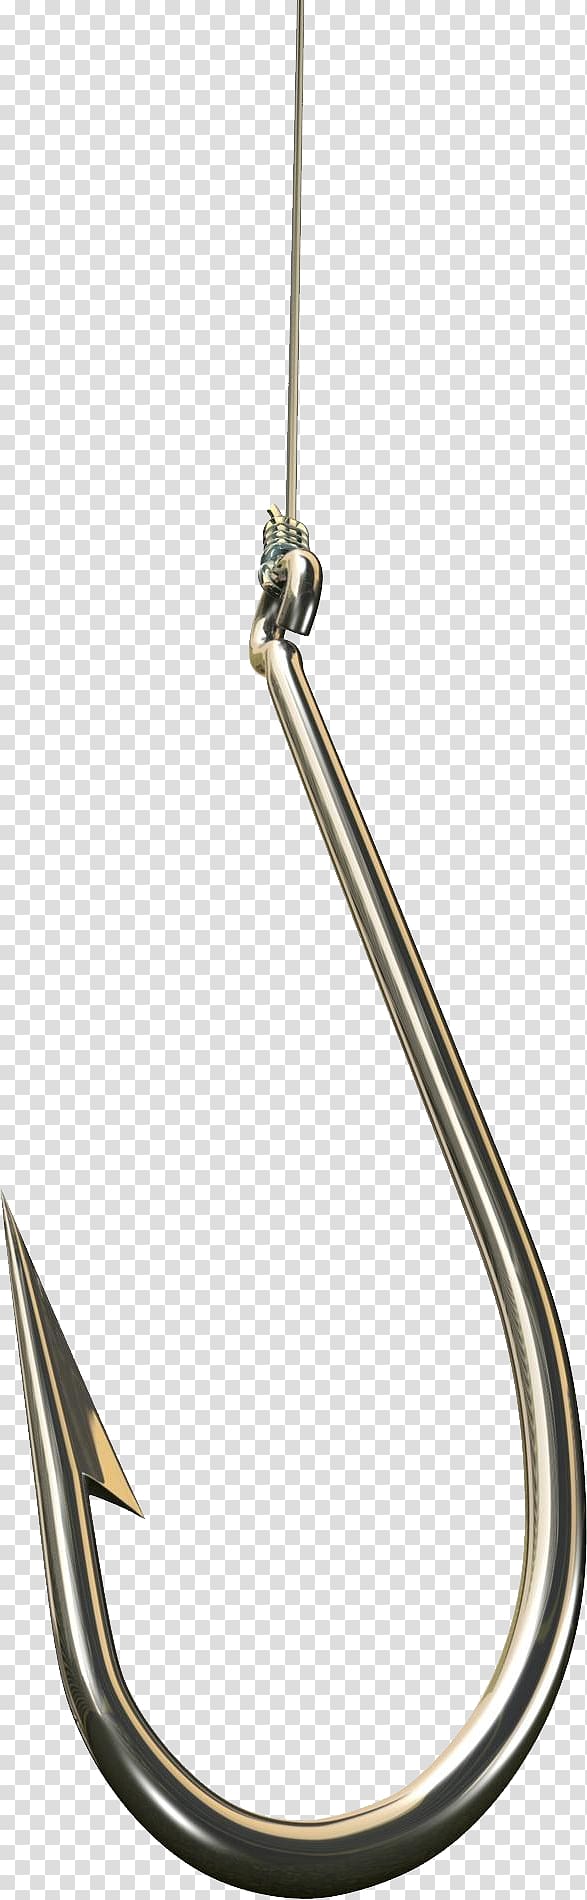 Recreation Body Jewellery Fishing Fish hook, fish_hook transparent background PNG clipart